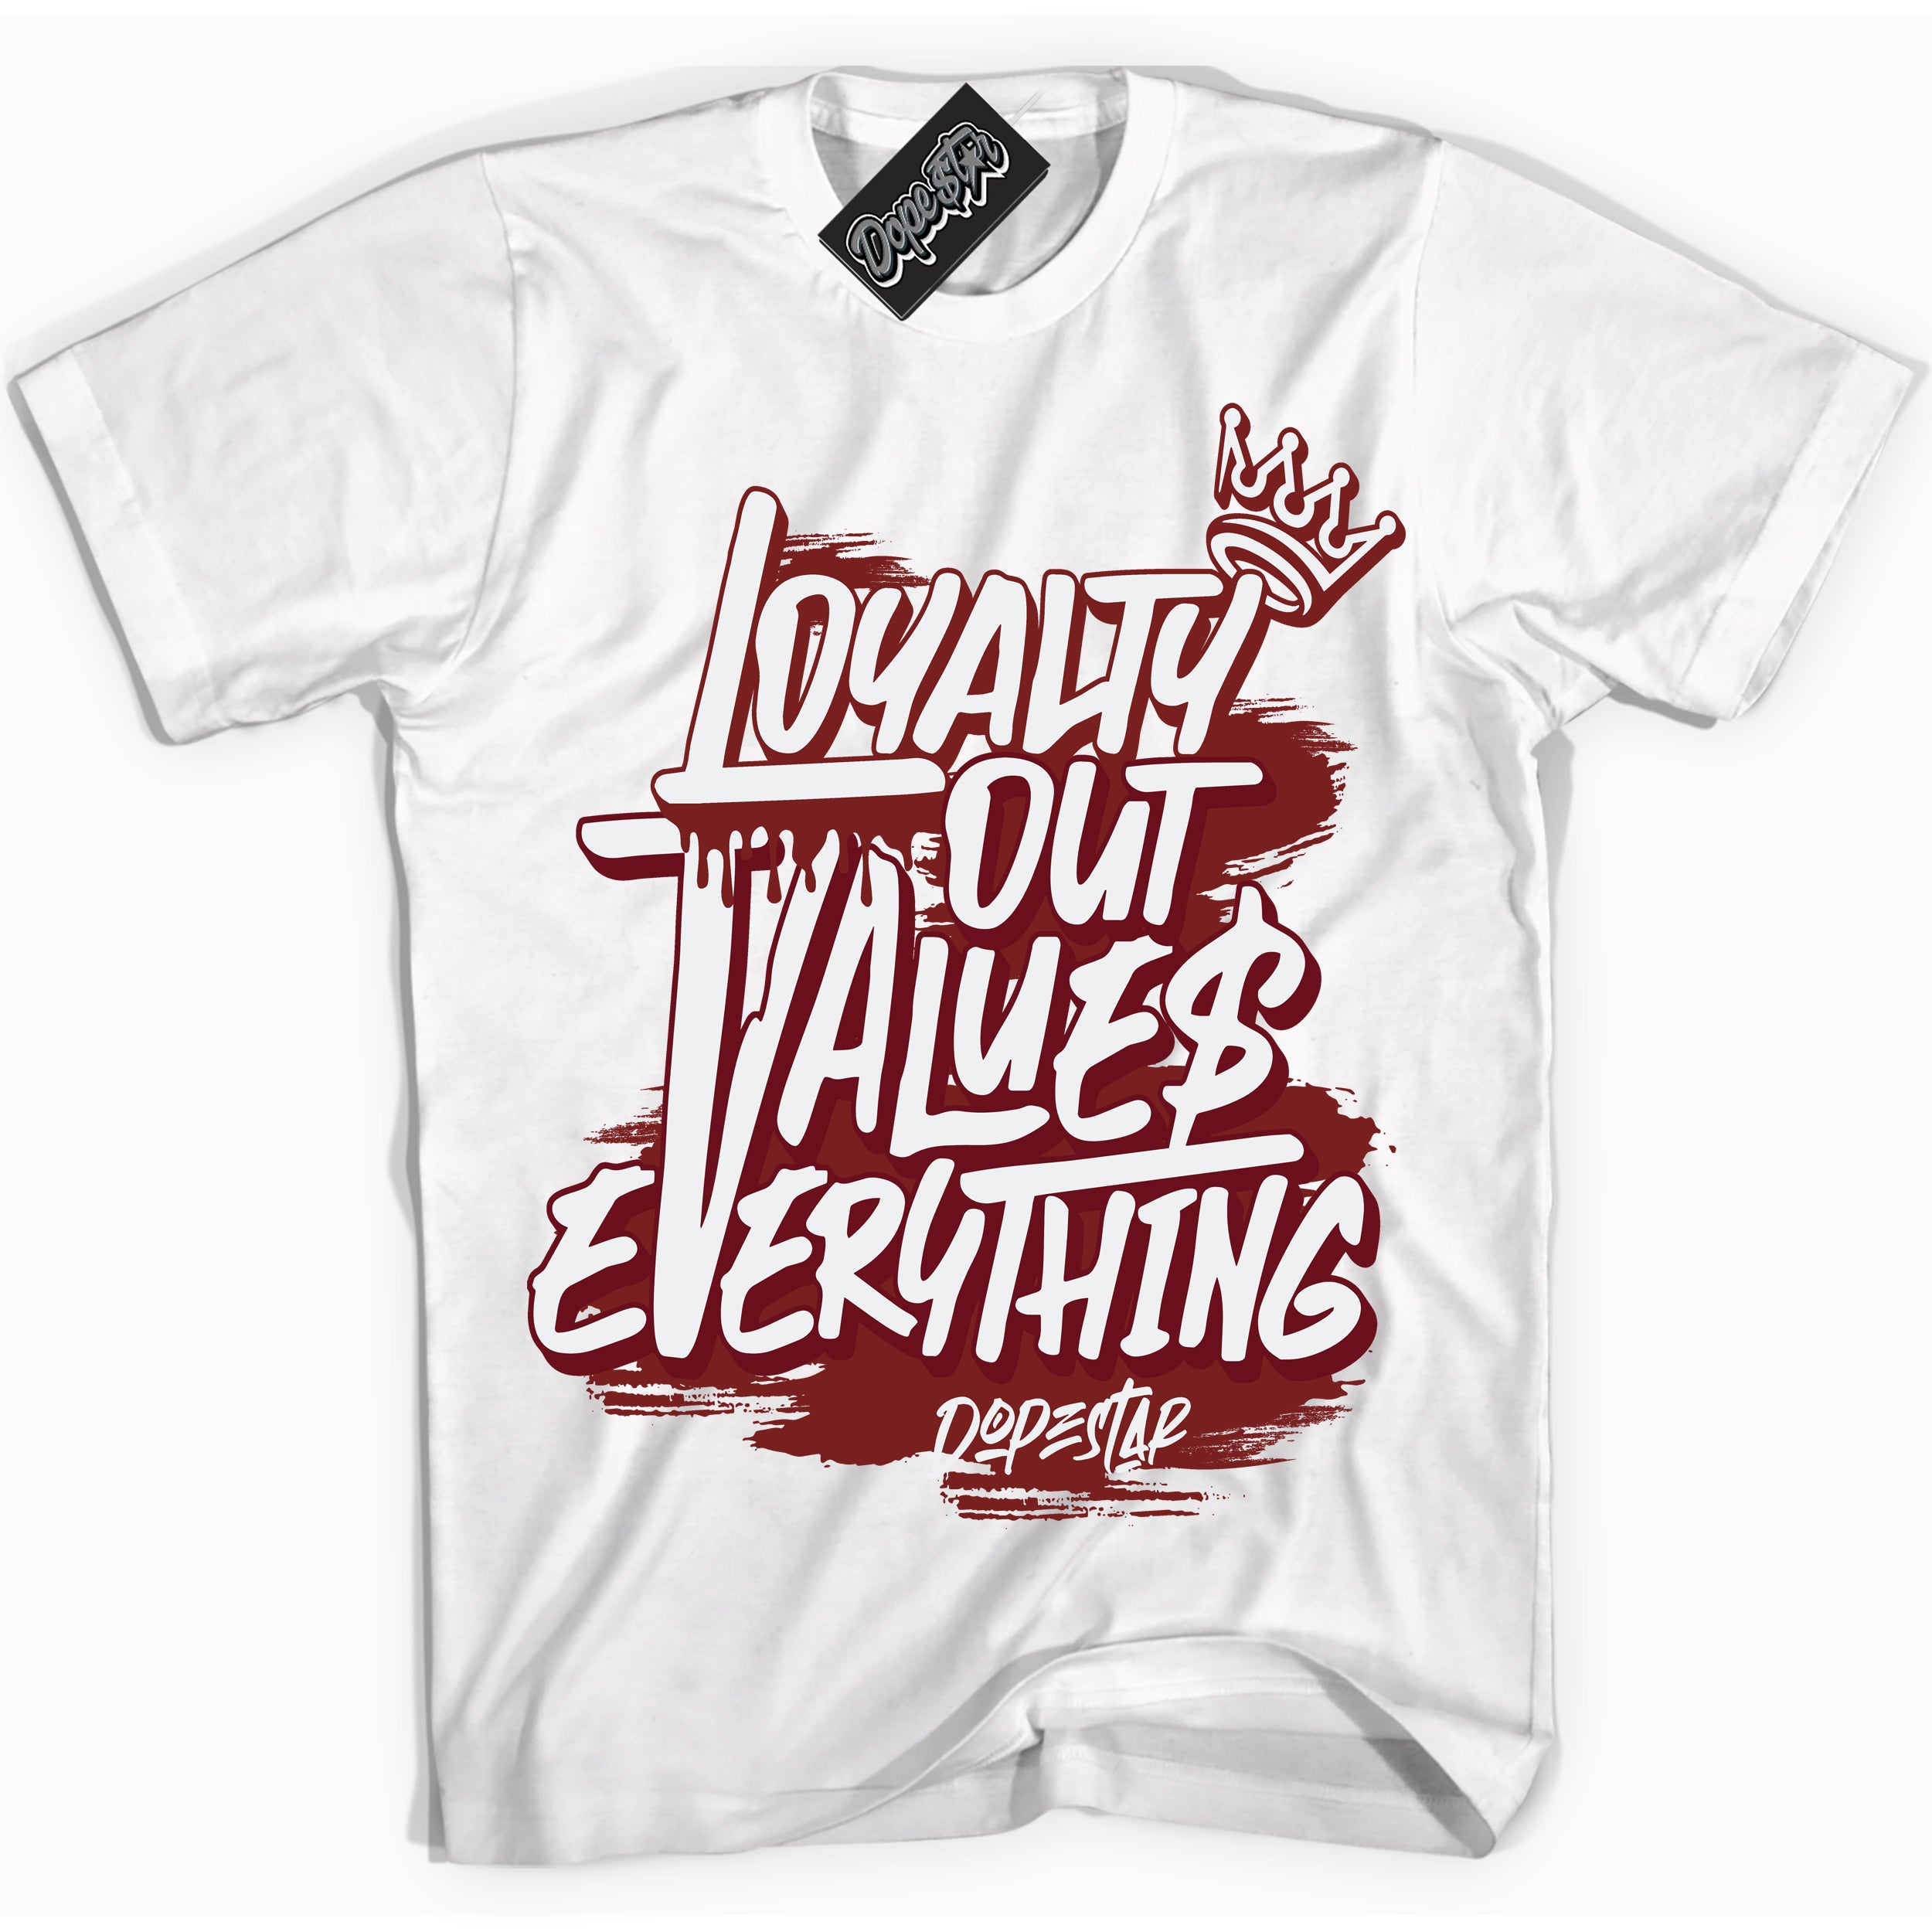 Cool White Shirt with “ Loyalty Out Values Everything” design that perfectly matches Dune Red 1s Sneakers.